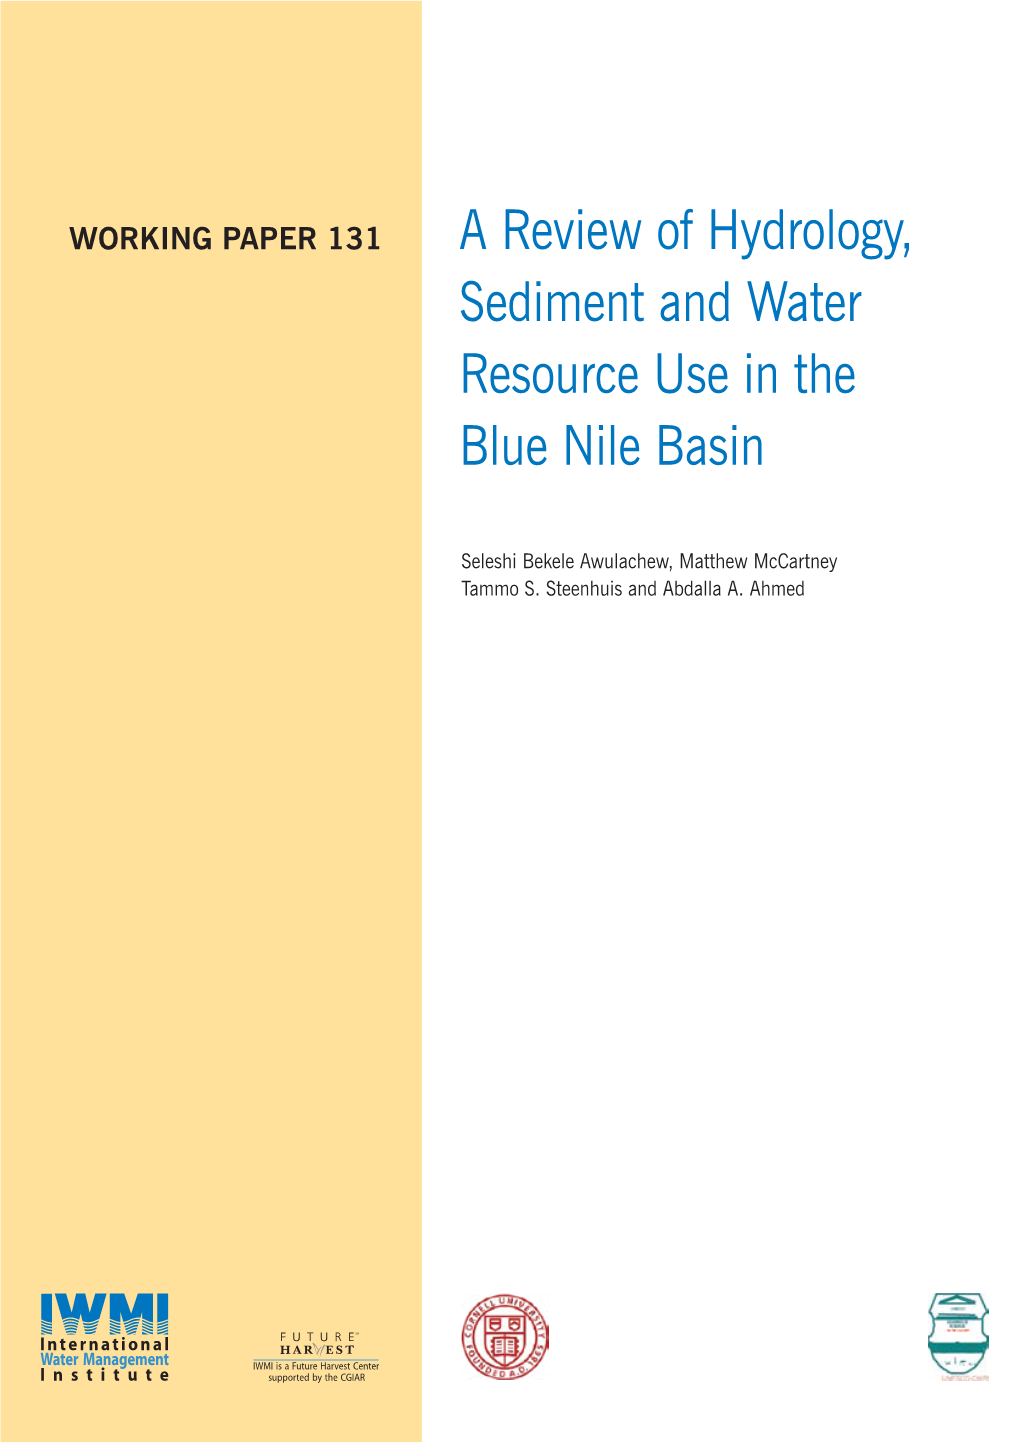 A Review of Hydrology, Sediment and Water Resource Use in the Blue Nile Basin